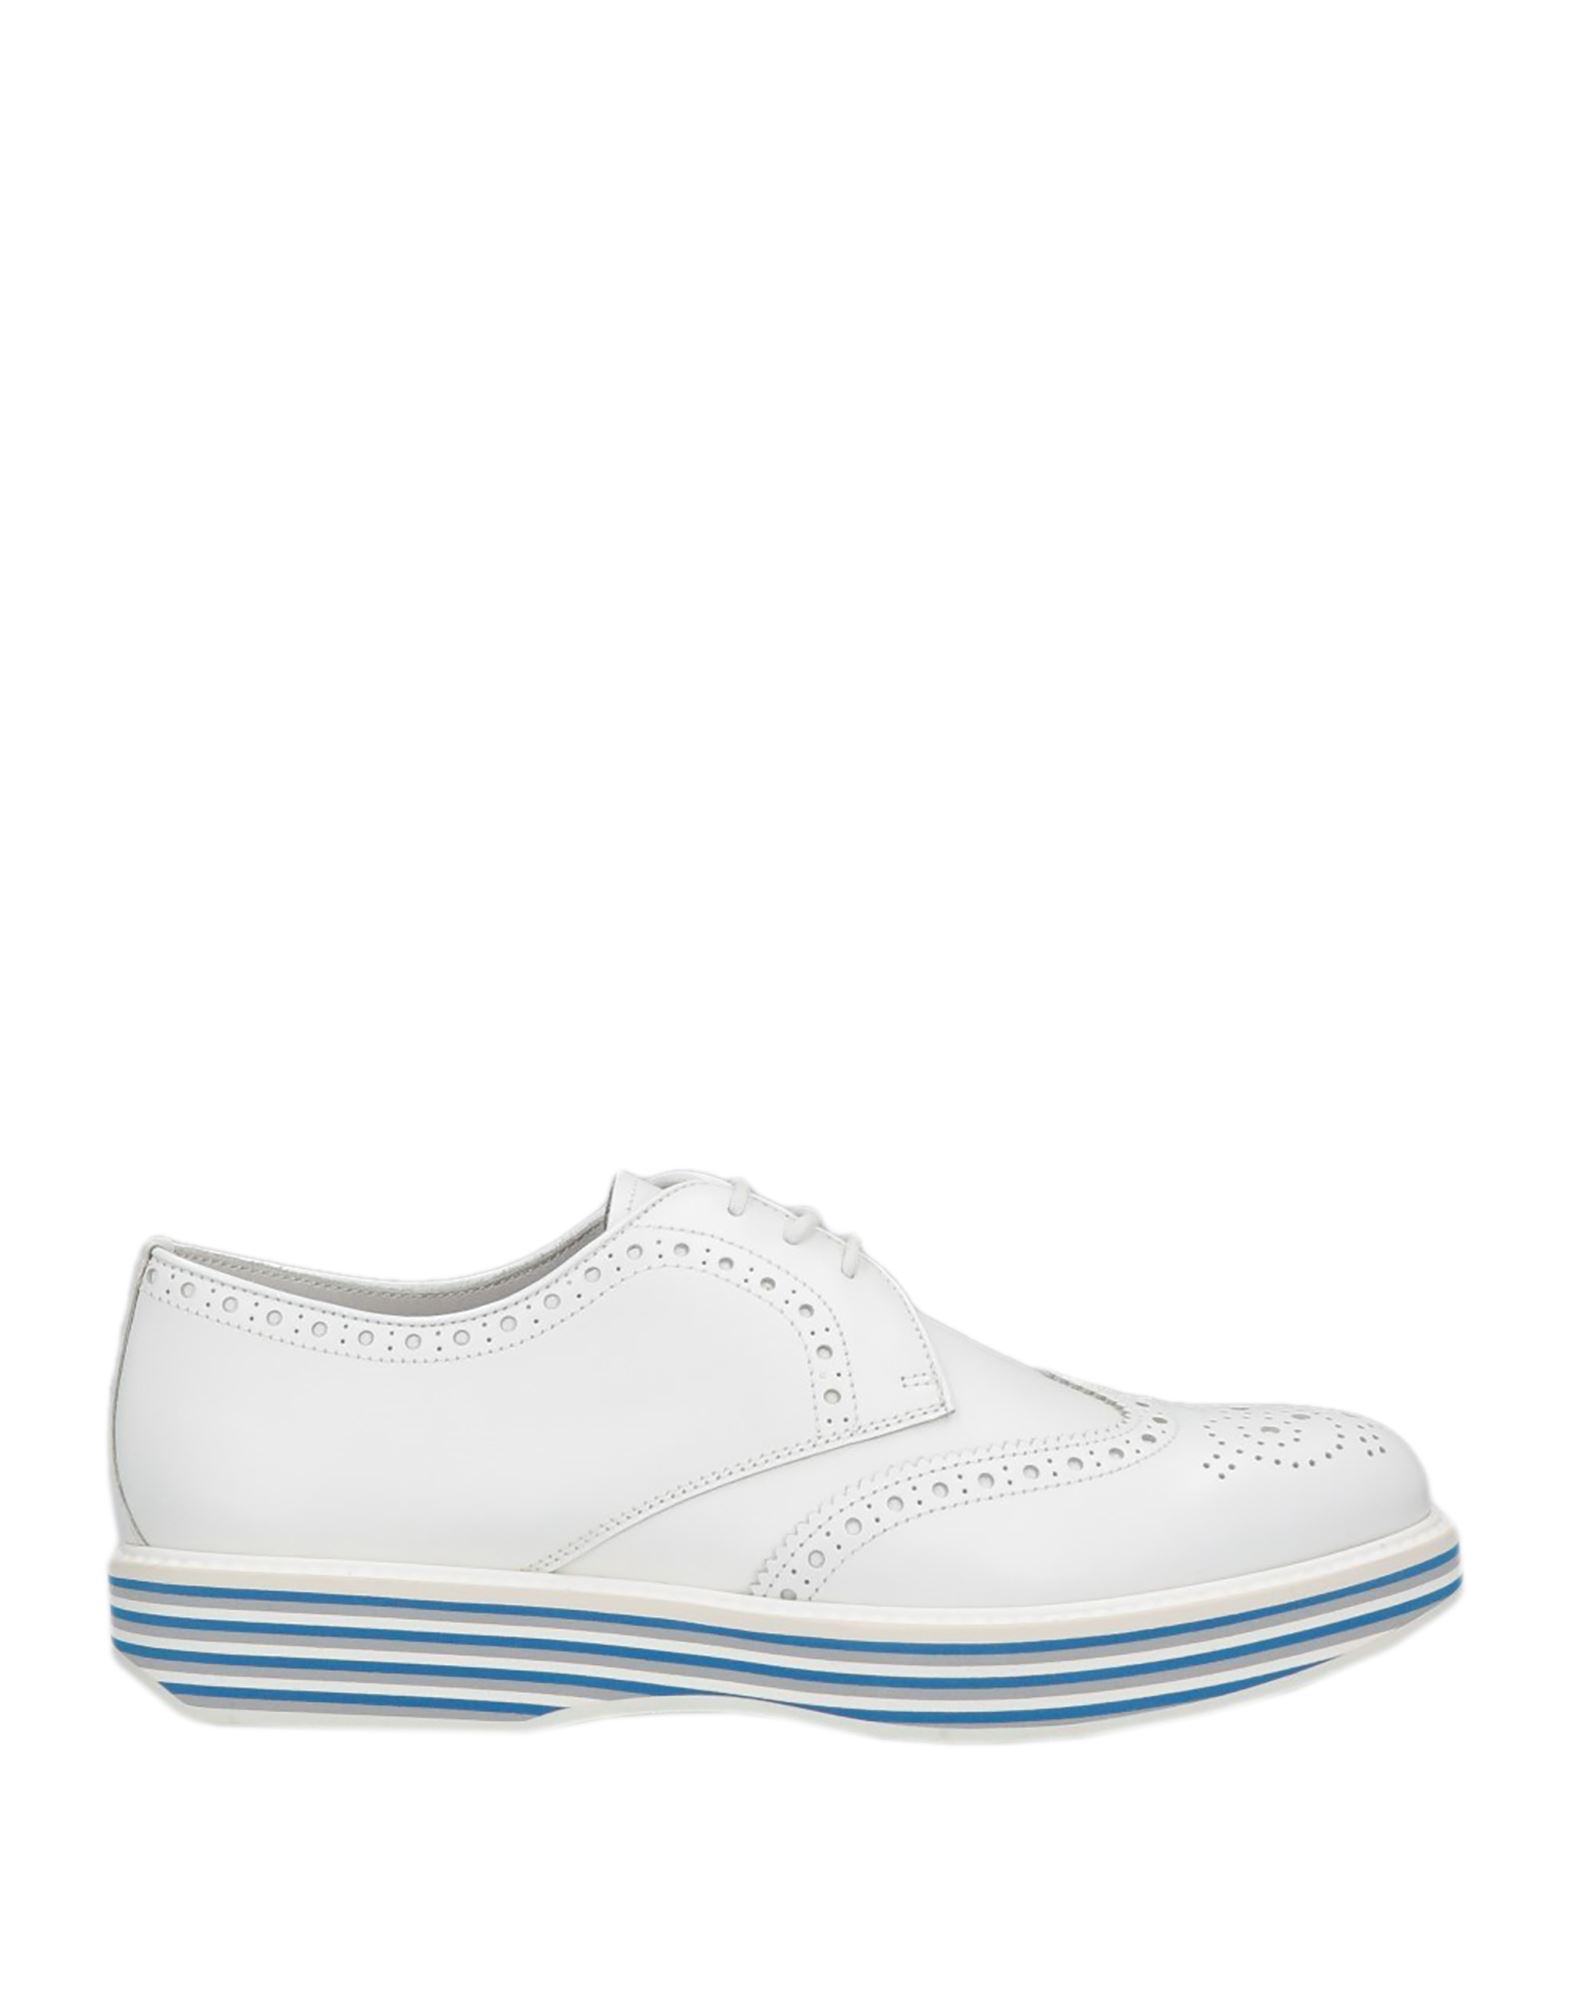 Church's Woman Lace-up Shoes White Size 5 Soft Leather